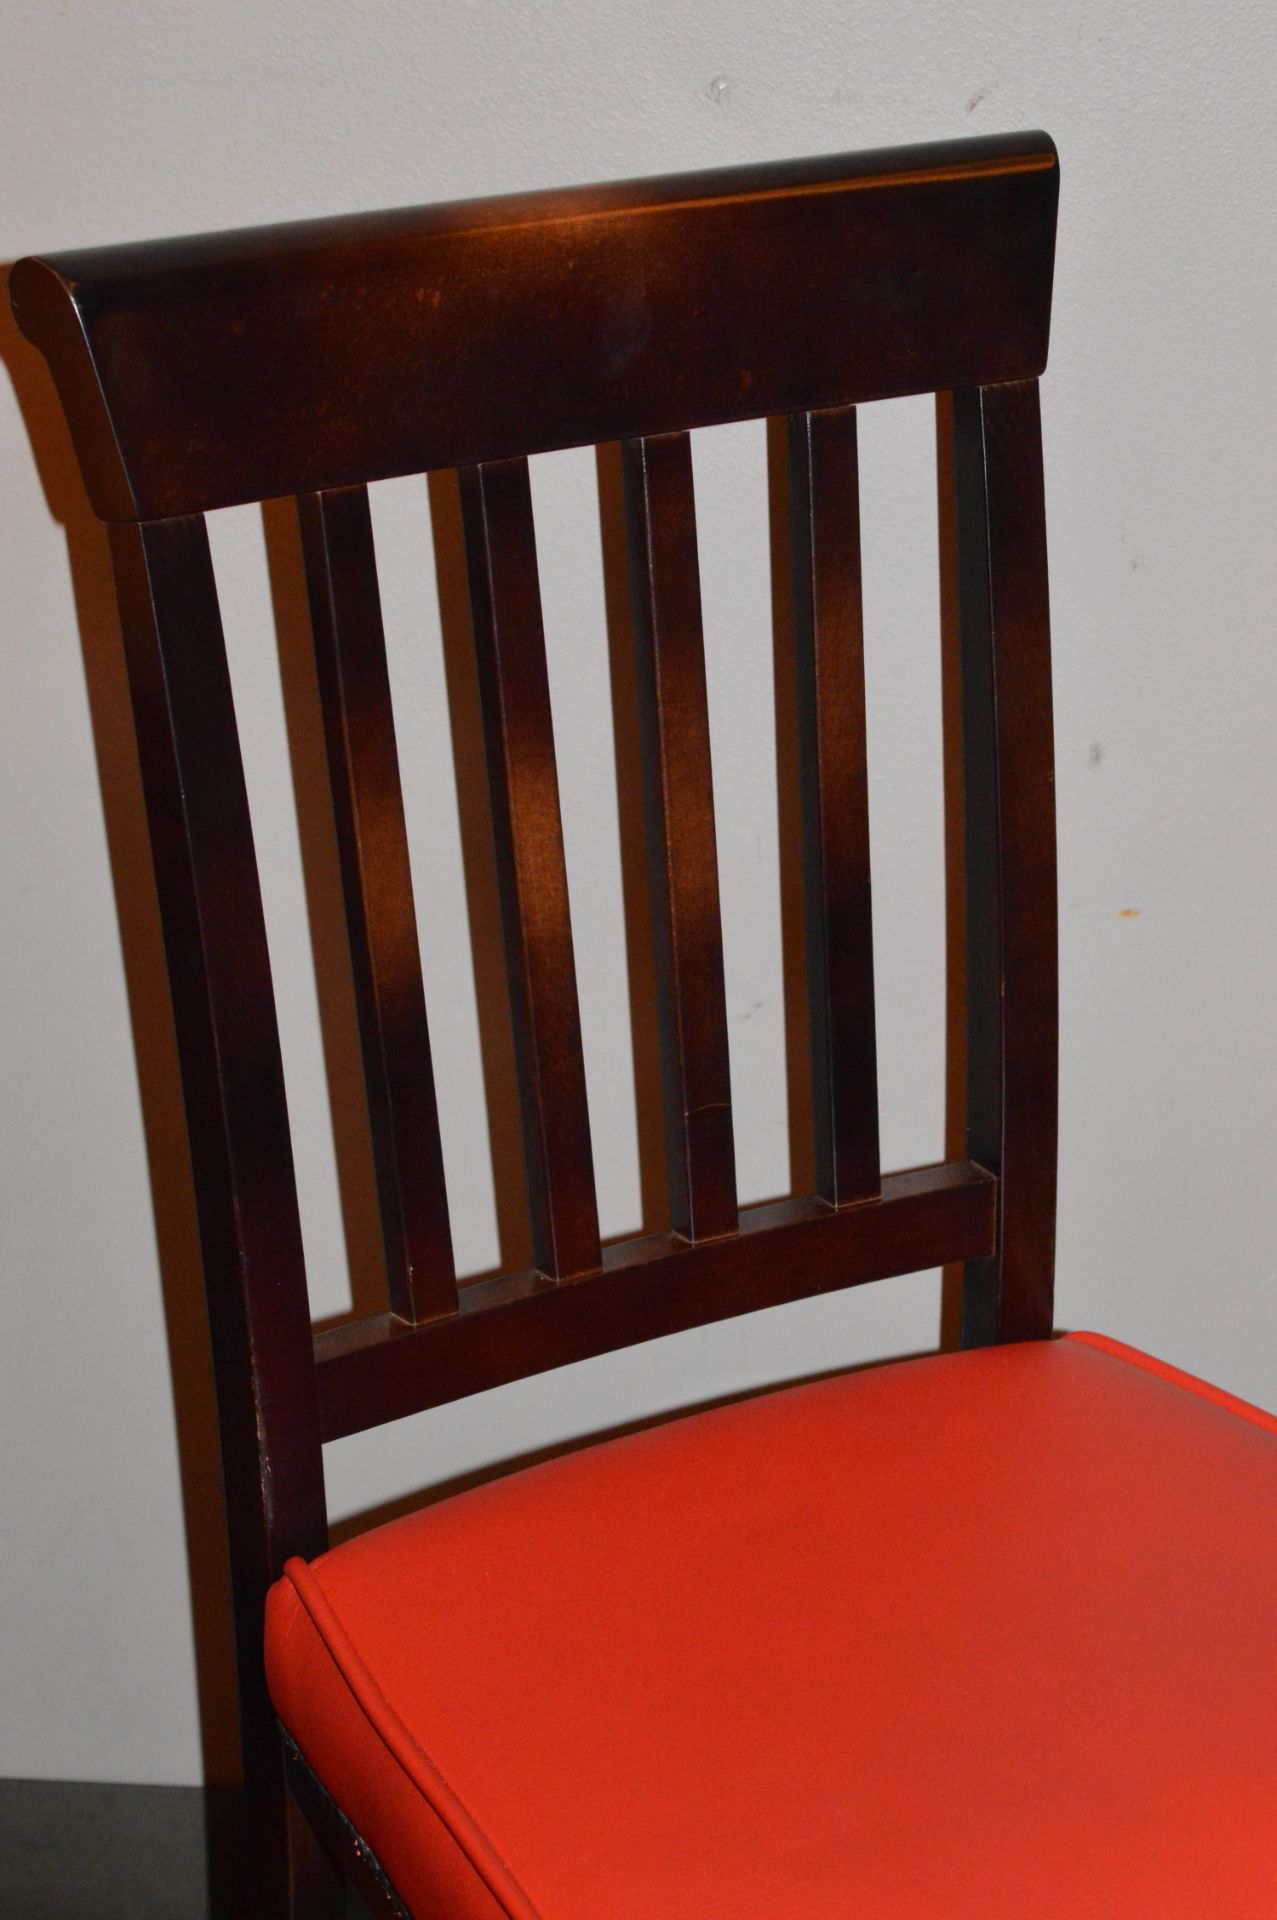 4 x High Back Dining Chairs With Red Leather Seat Cushions and Studded Detail - Hardwoord Frames - - Image 2 of 4